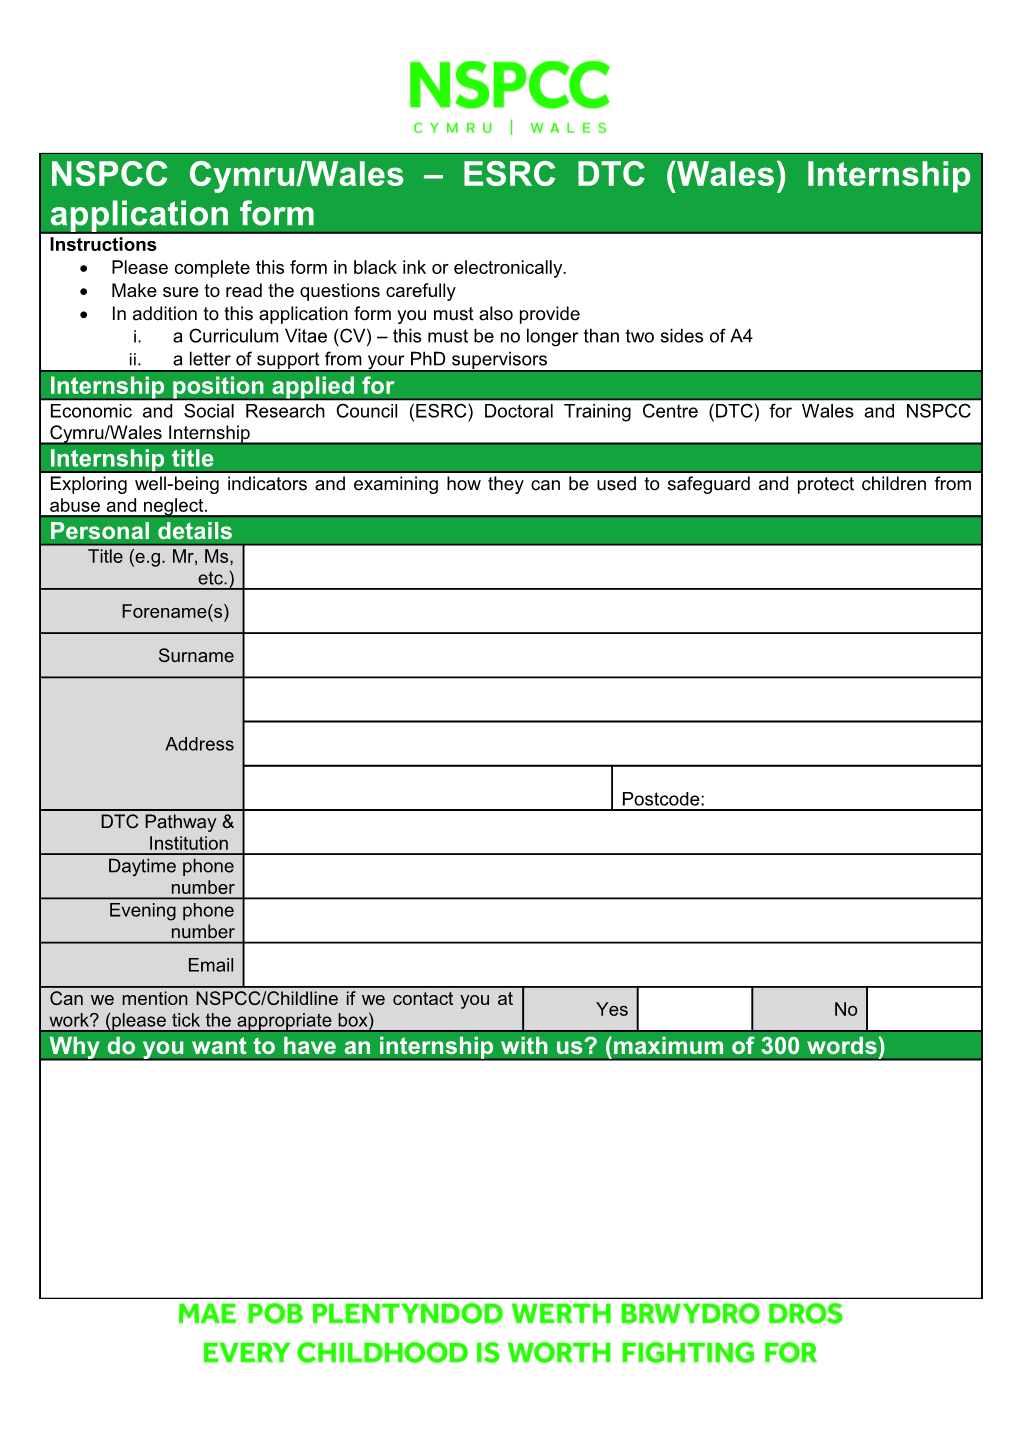 Please Complete This Form in Black Ink Or Electronically